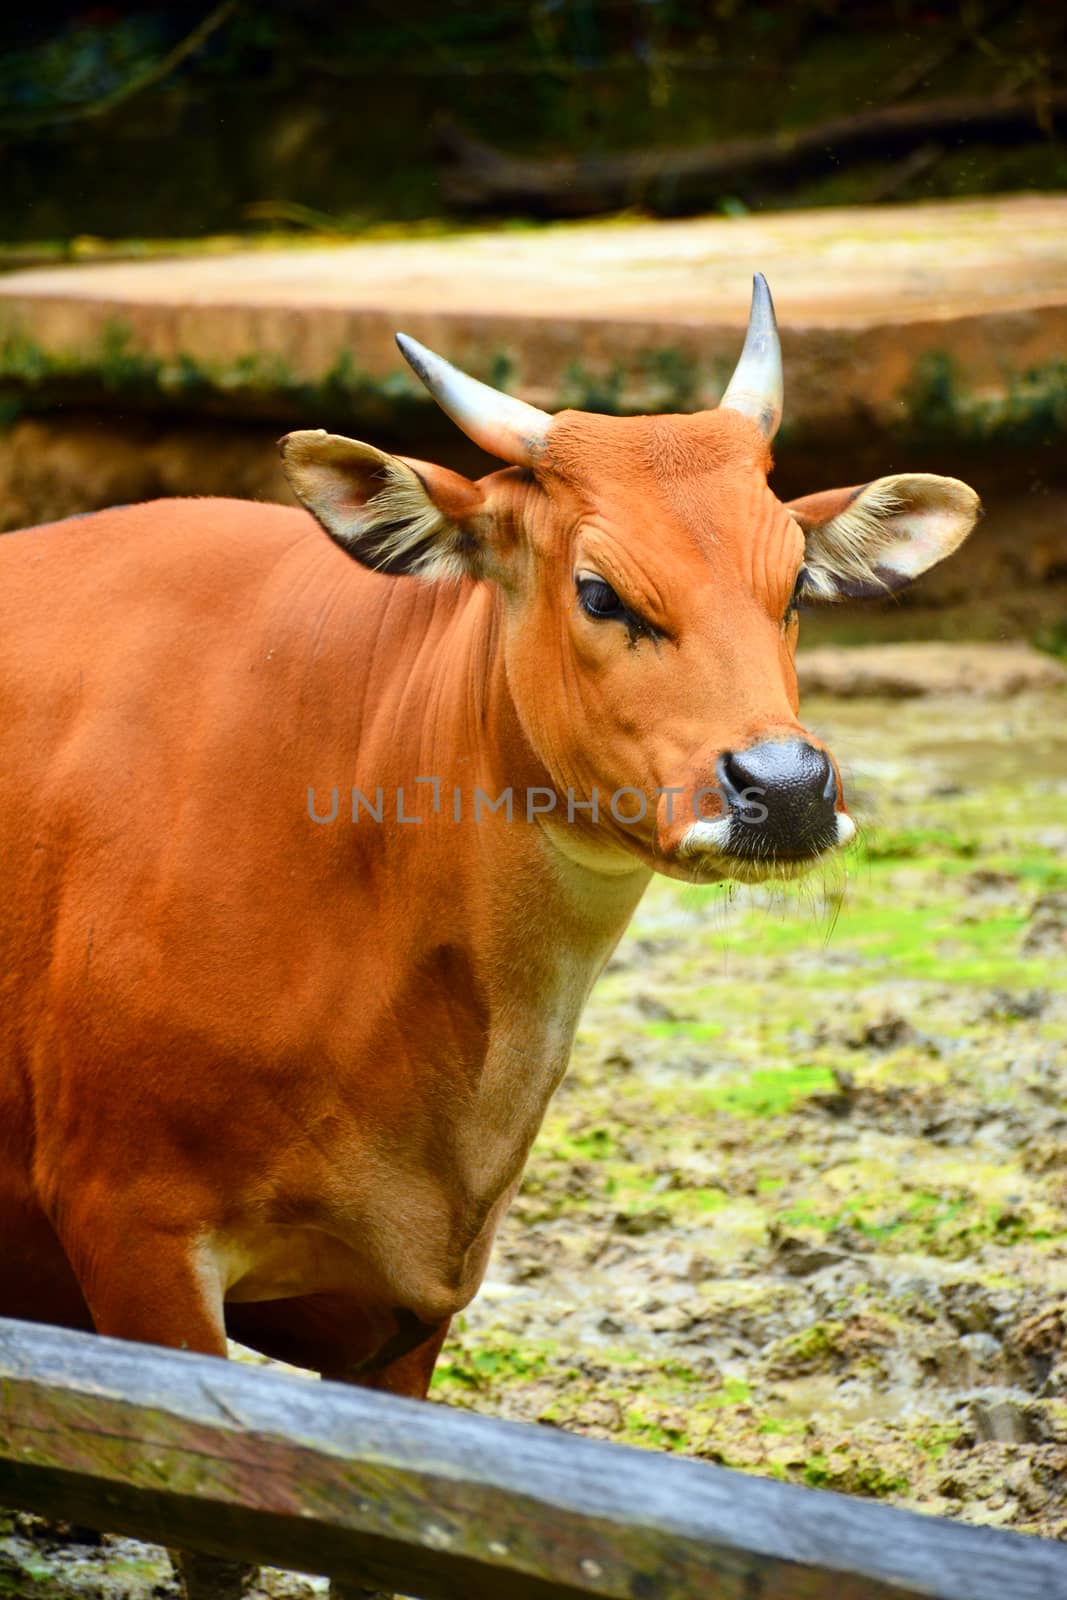 Banteng also known as Tembadau, is a species of wild cattle found in Southeast Asia at Lok Kawi wildlife park